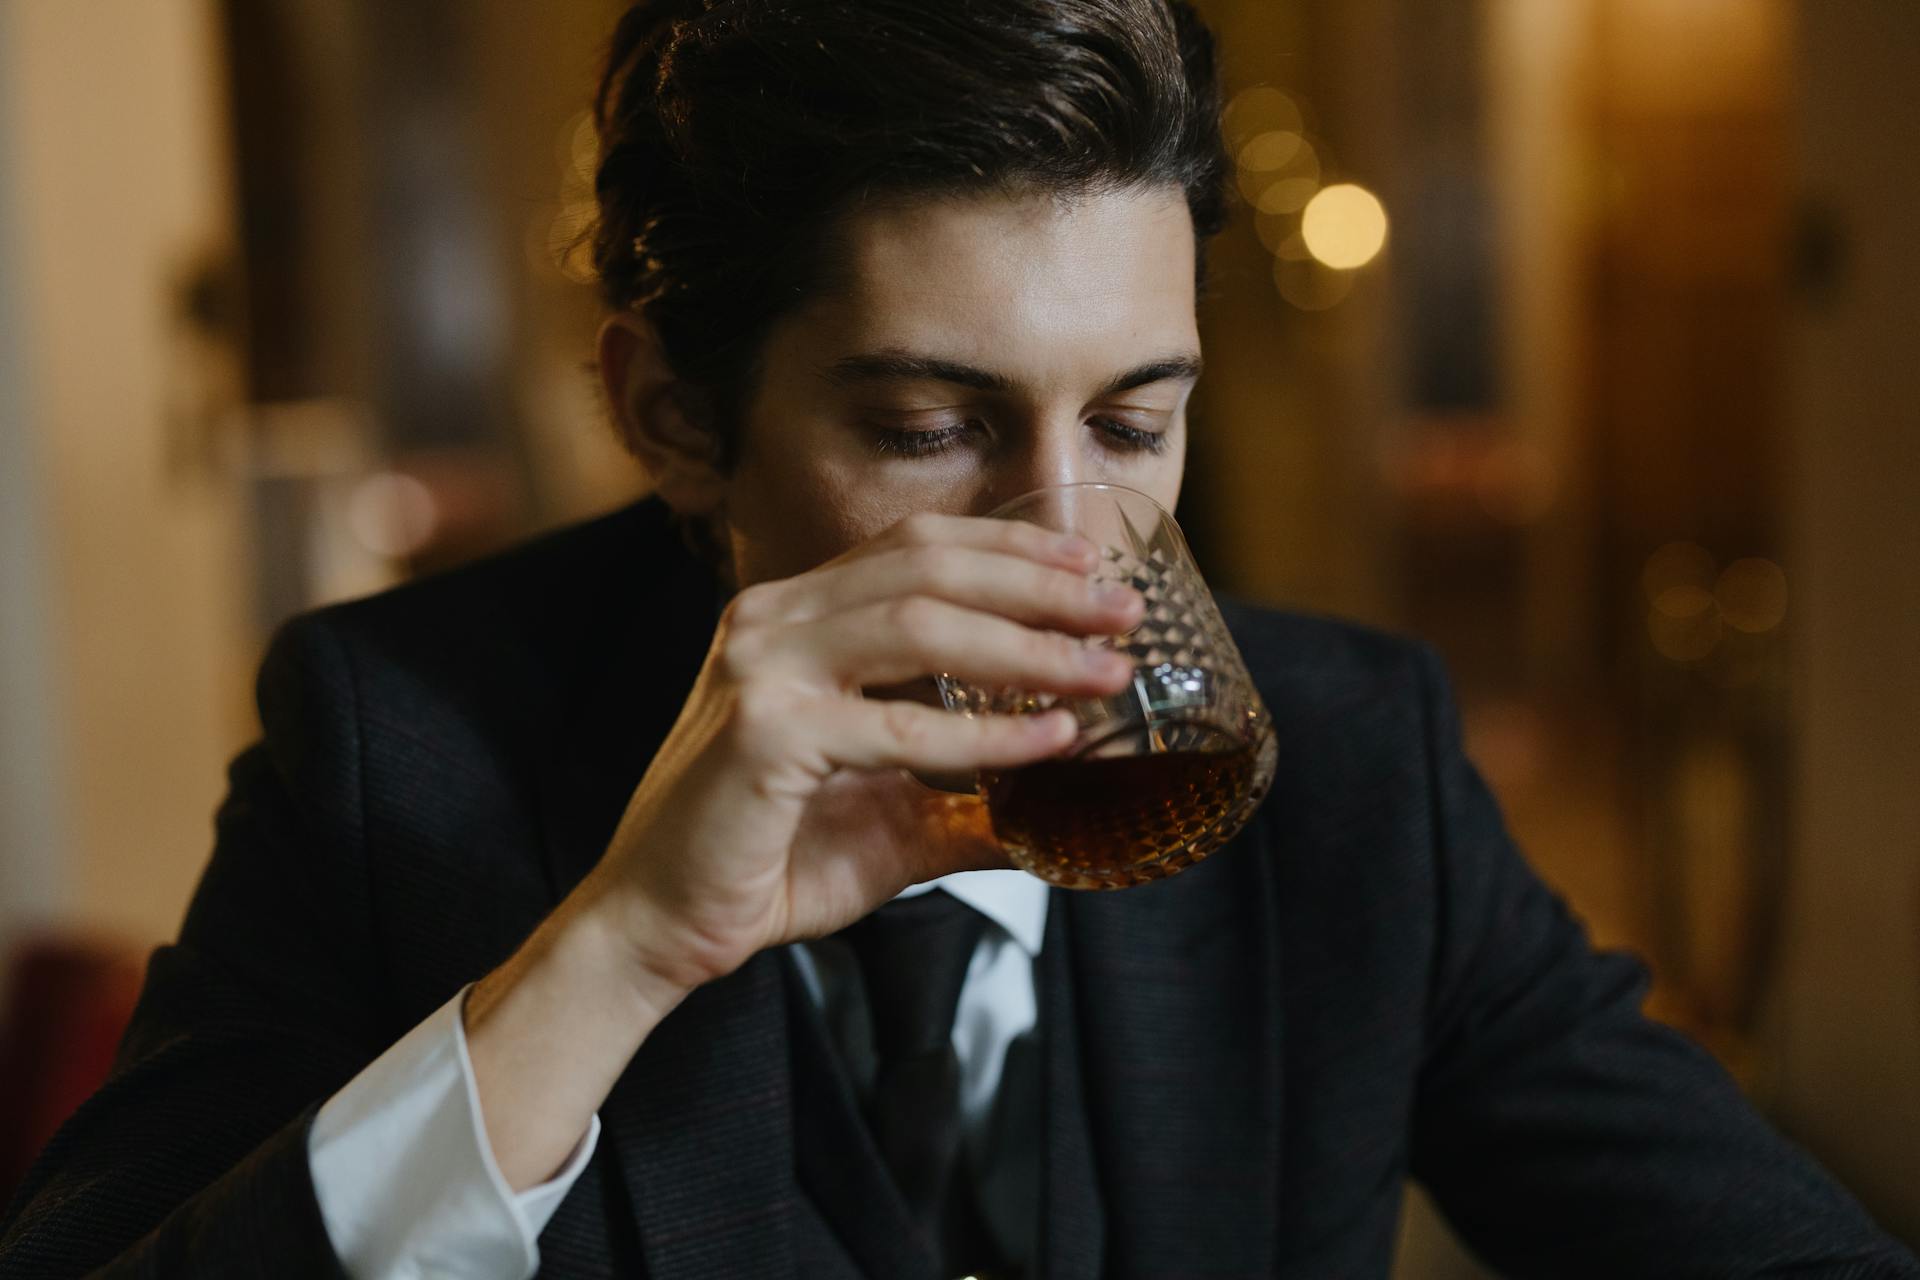 A man drinking whiskey | Source: Pexels